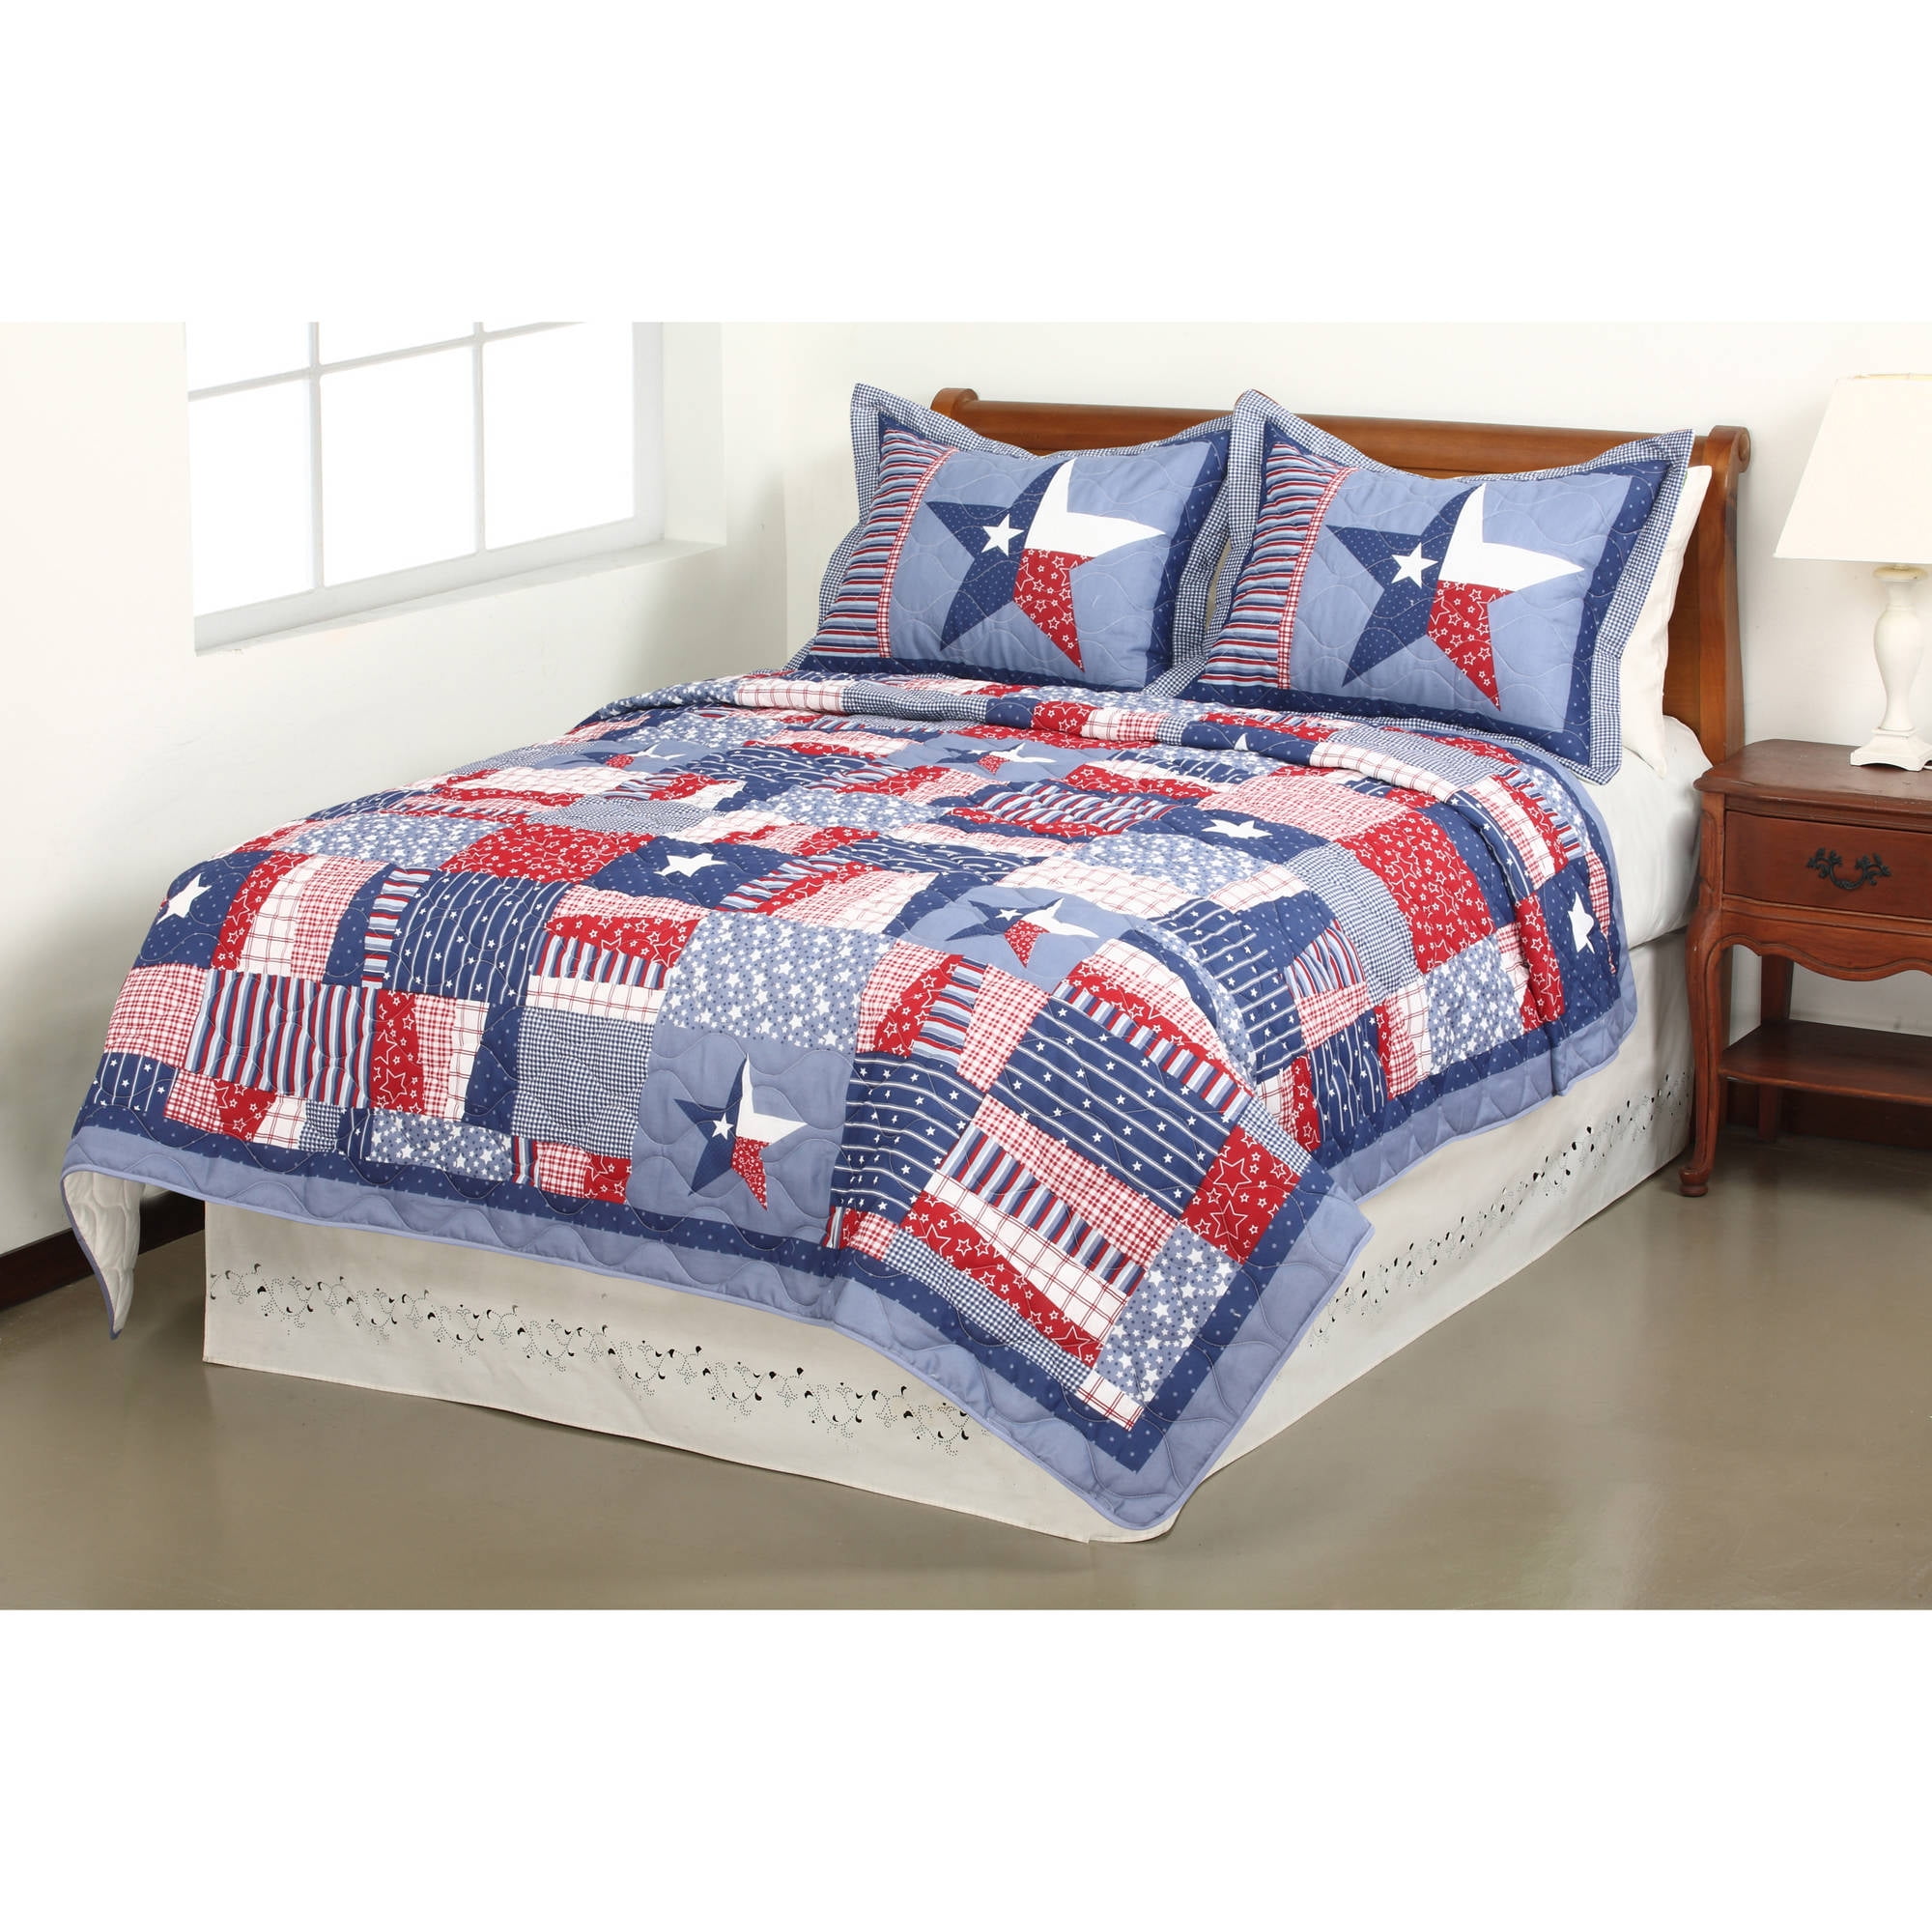 New Mainstays Star & Stripes Quilted King Size Pillow Sham 1 Piece 